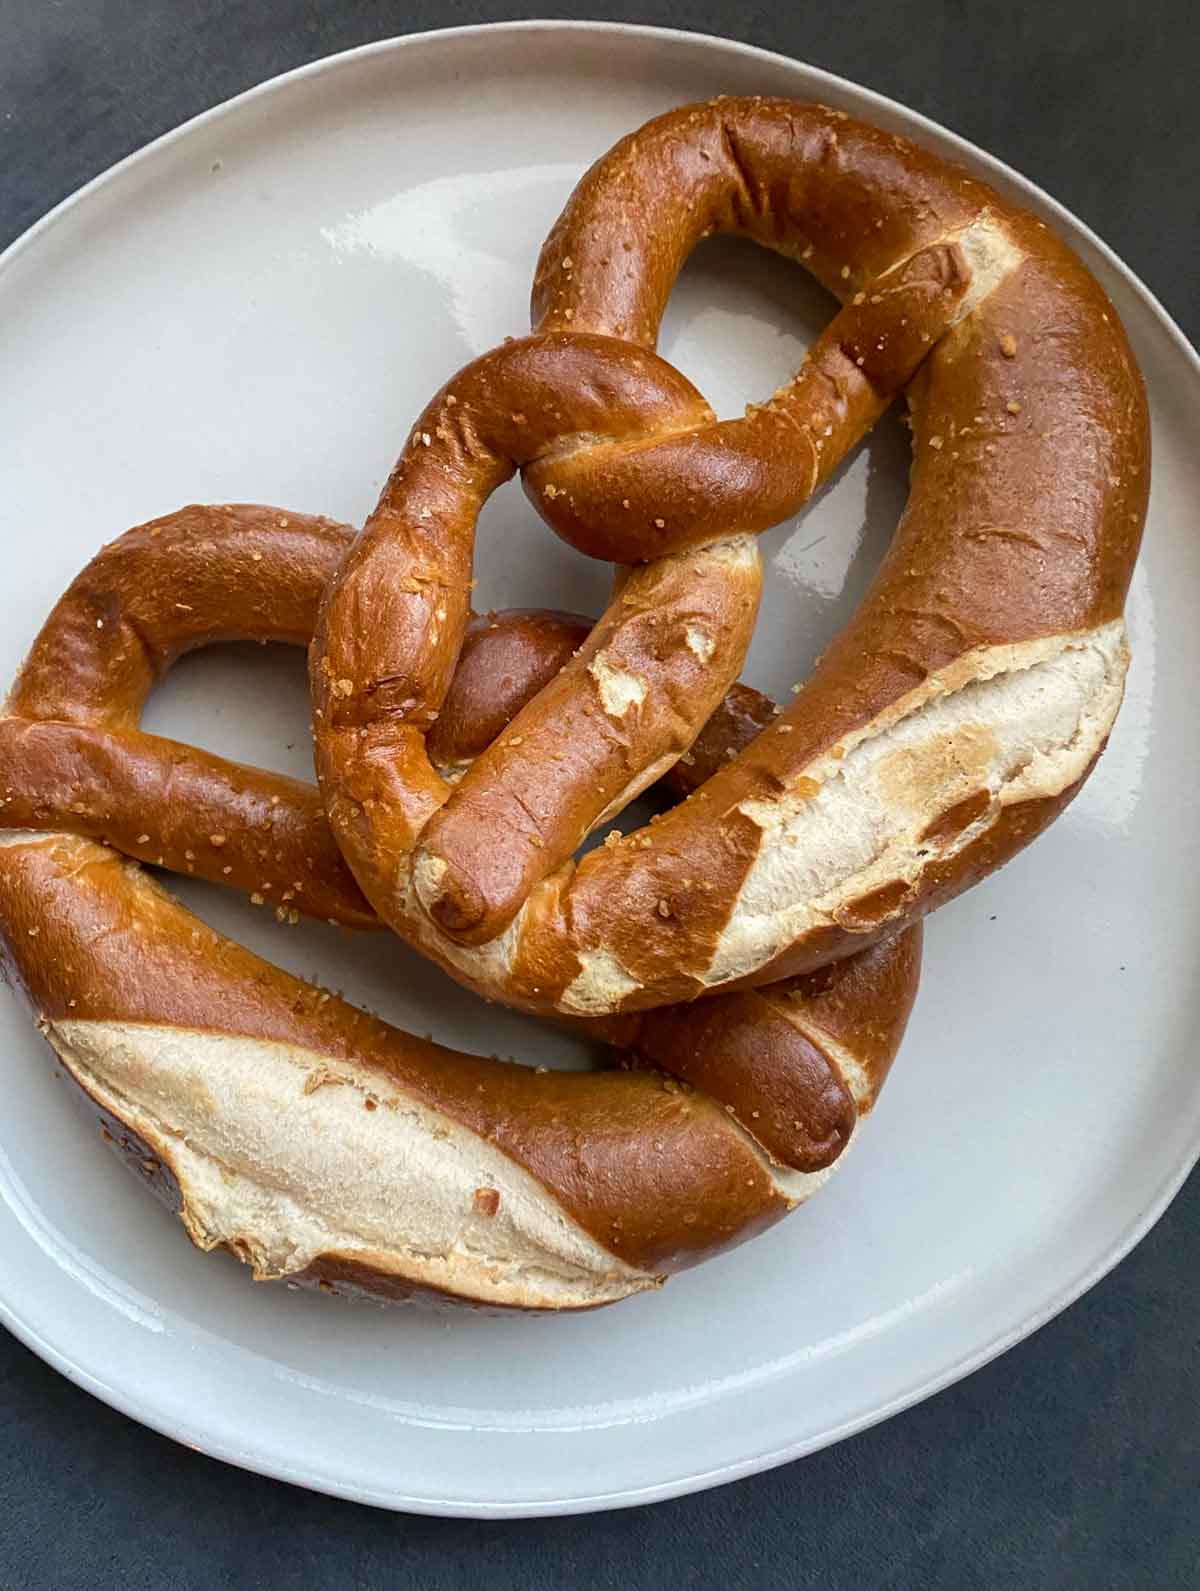 German pretzels from the brot box on white plate